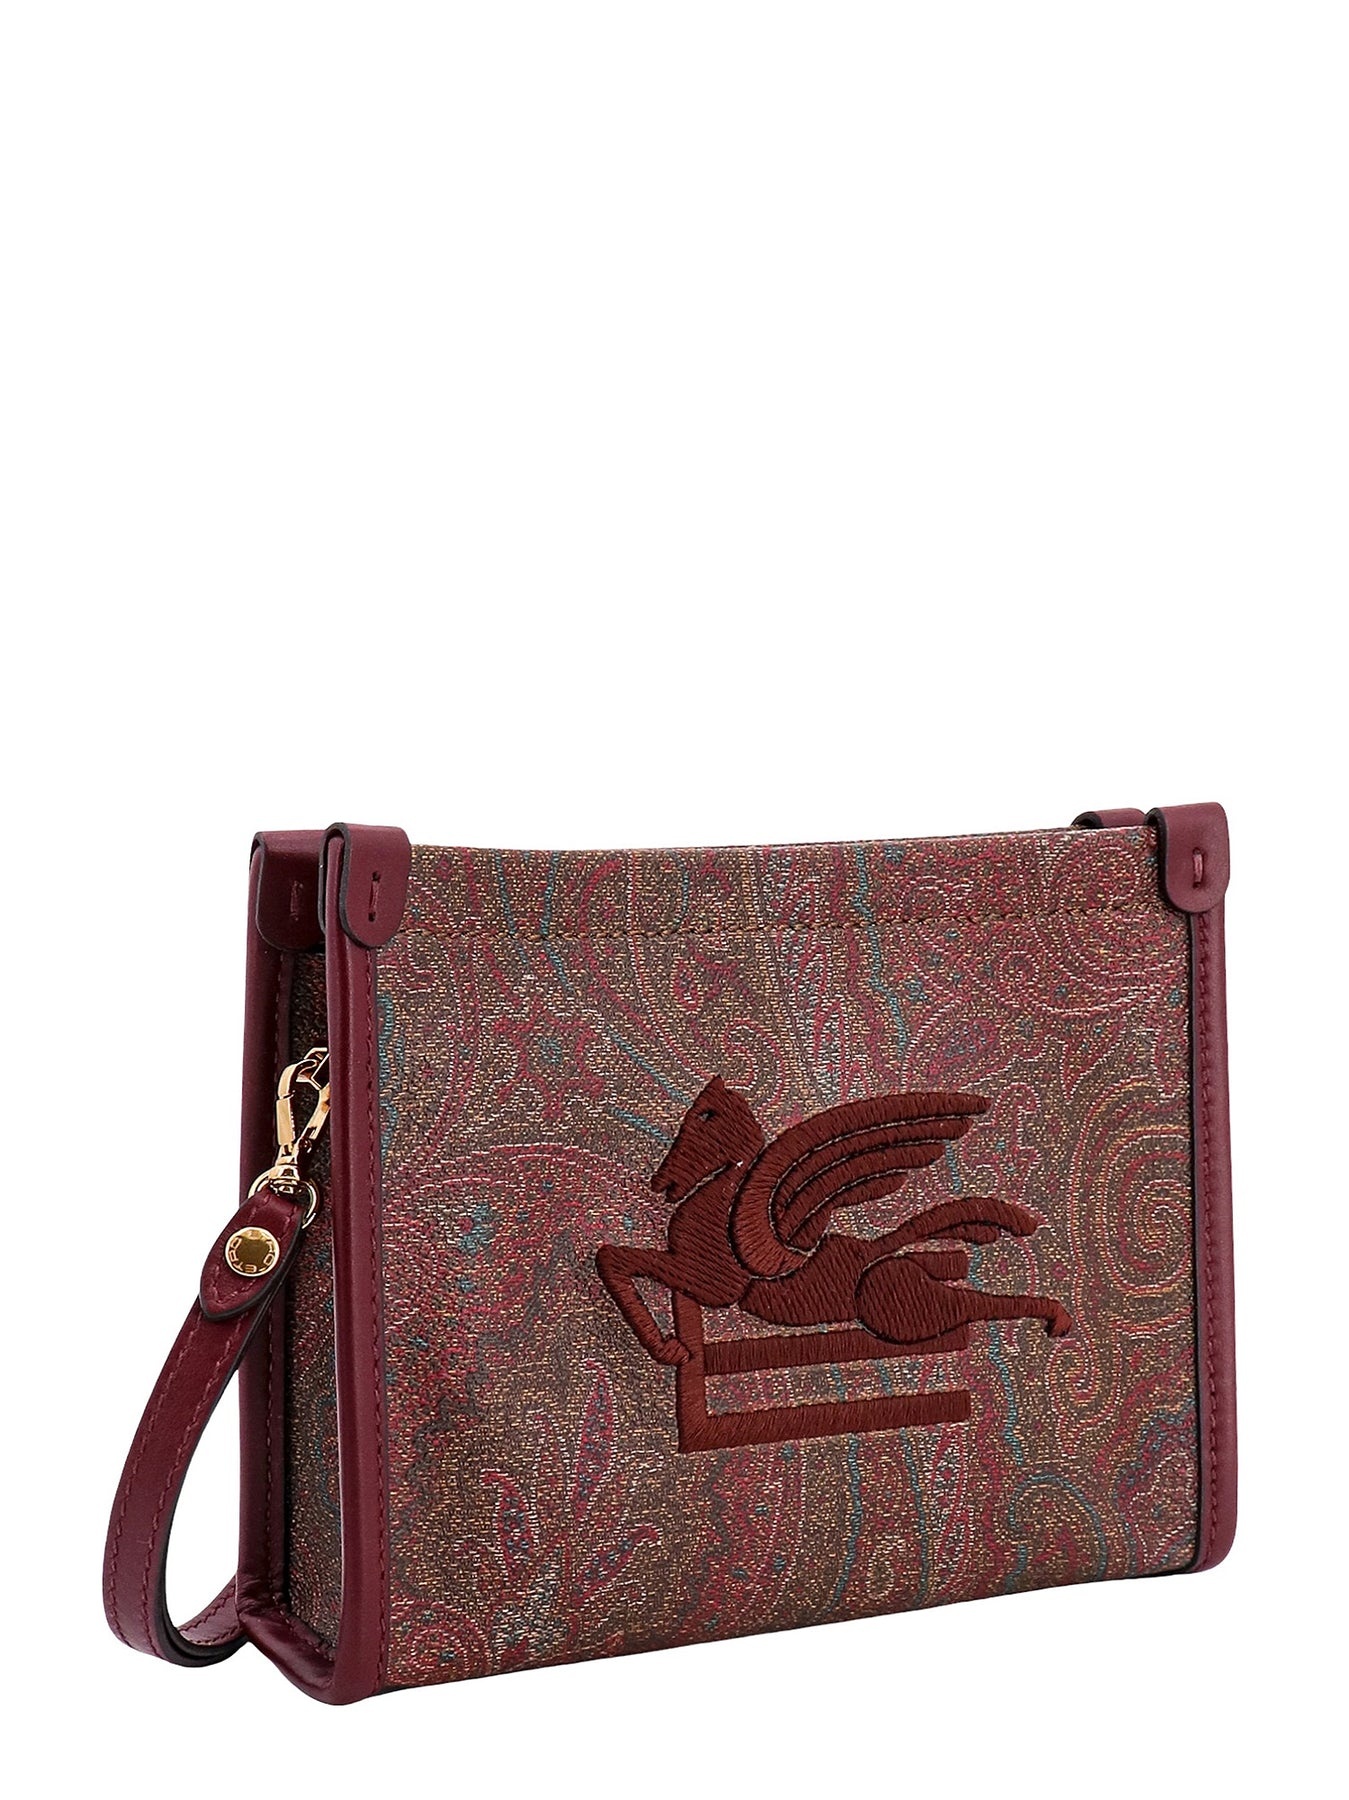 Paisley fabric pouch with embroidered Etro Pegaso logo - 3